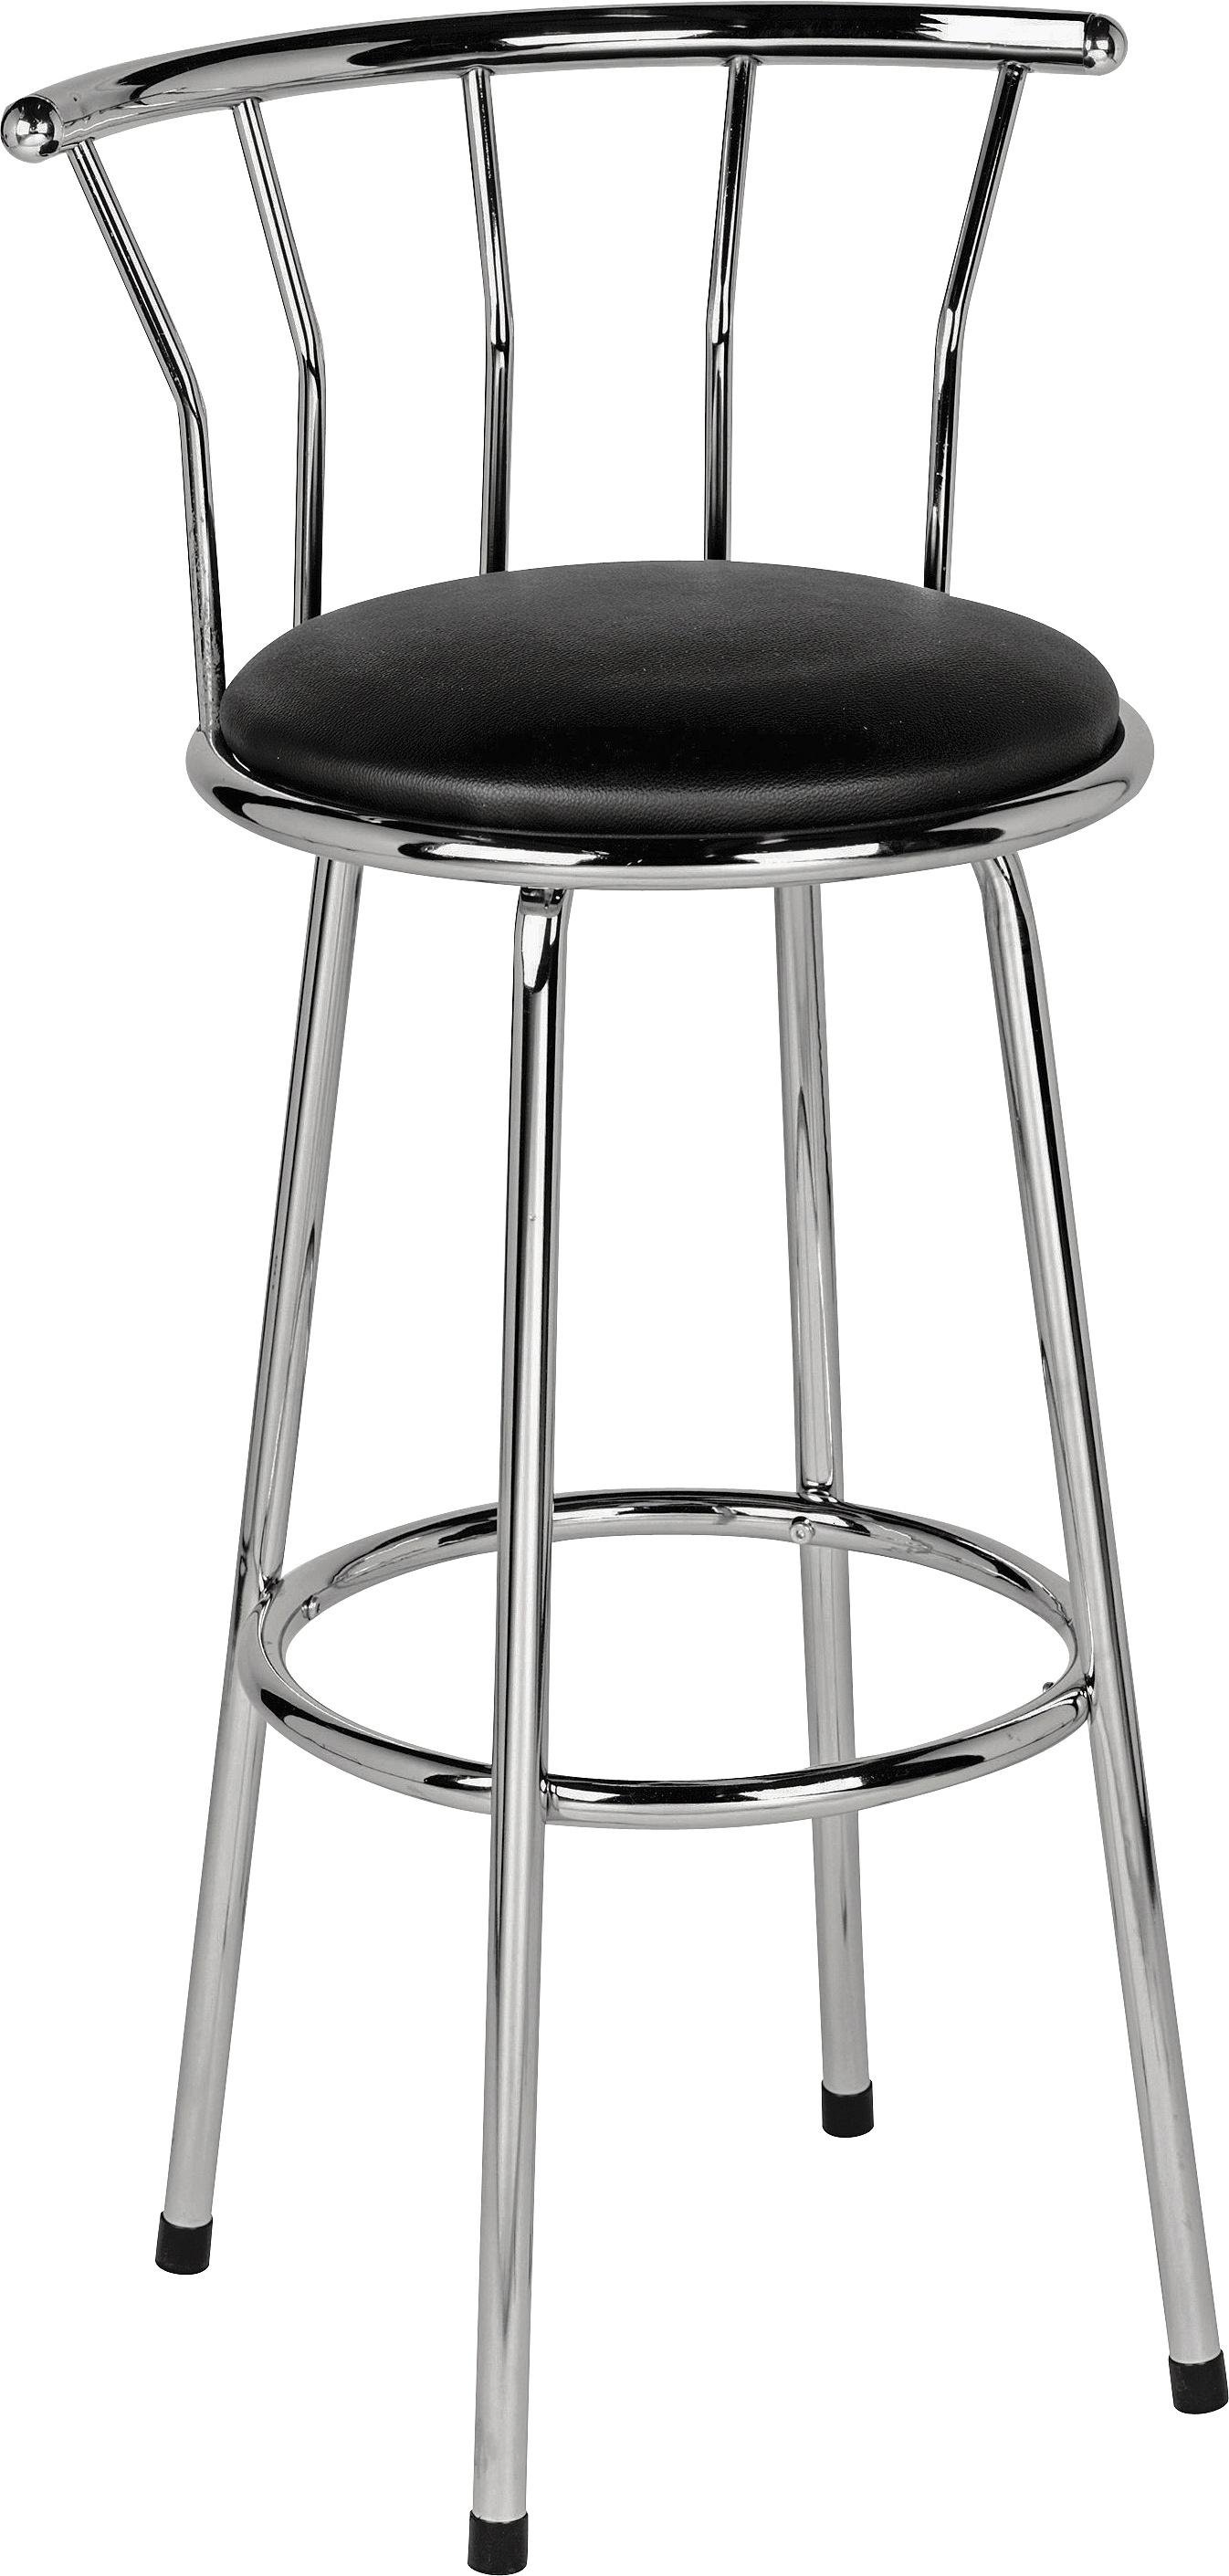 Argos Home Gemini Leather Effect Bar Stool review